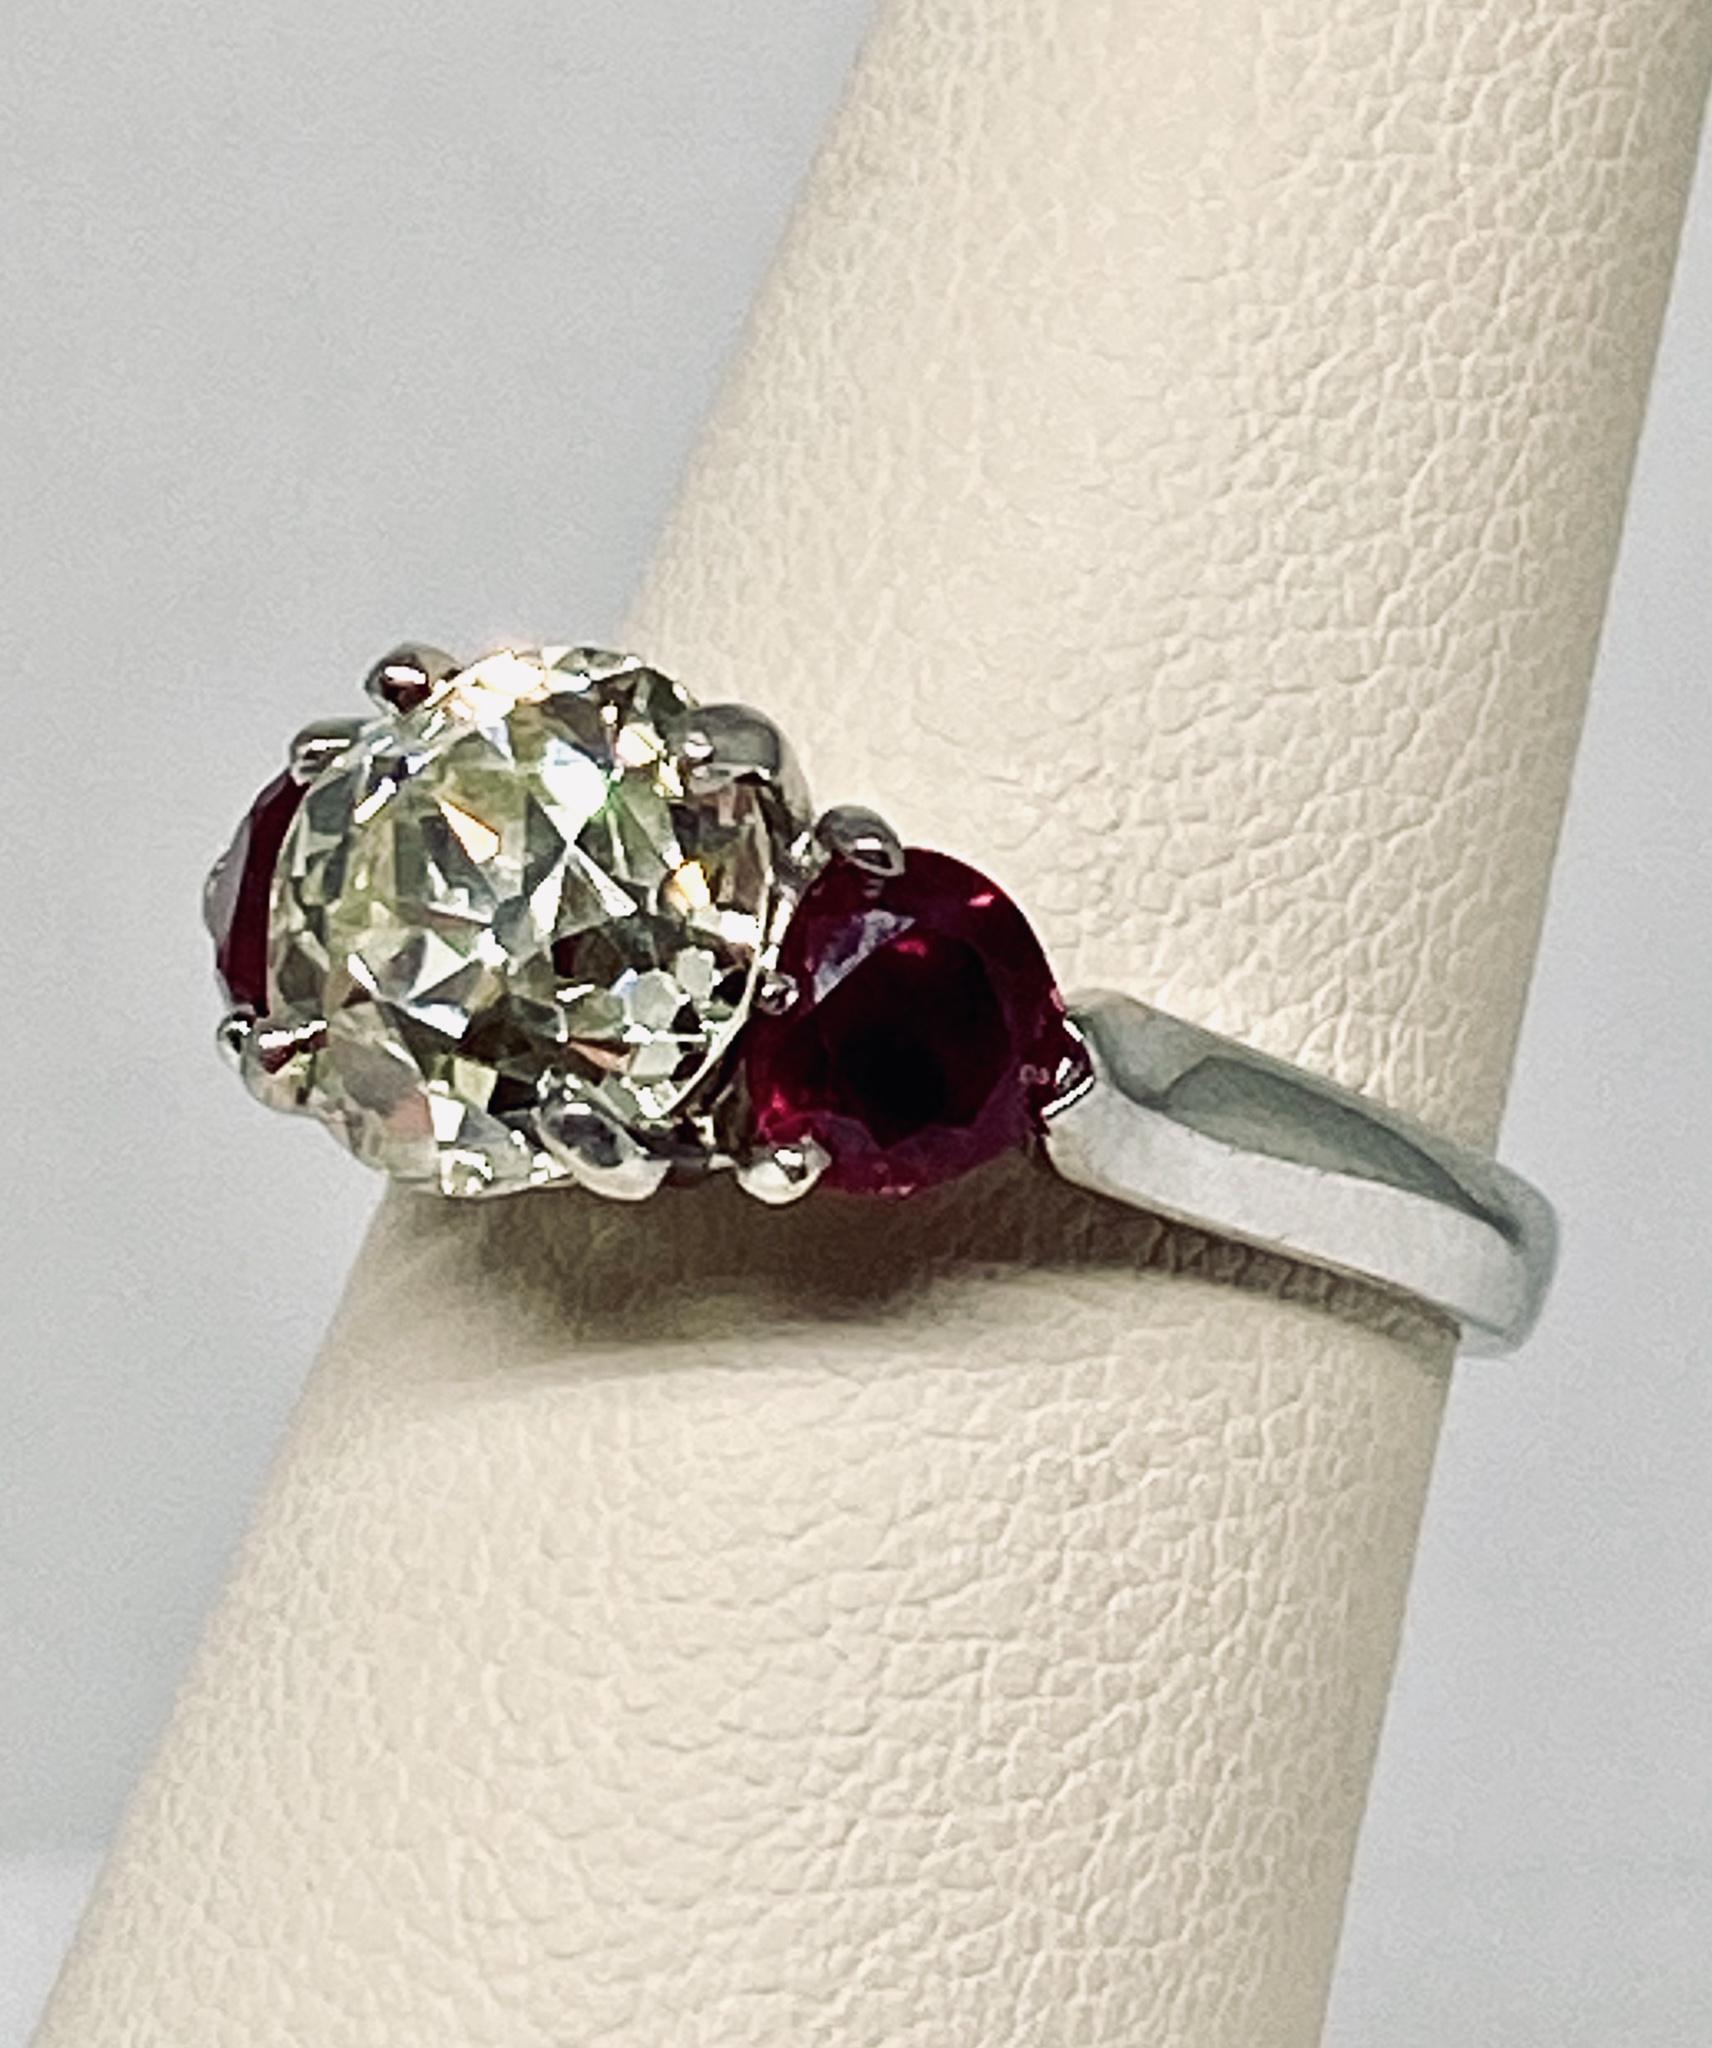 Beautiful estate 3 stone engagement style ring in platinum featuring a prong set round cut white diamond center stone weighing 2.50 carats with a K color grade and SI clarity flanked by two round cut prong set deep red rubies on a solid platinum